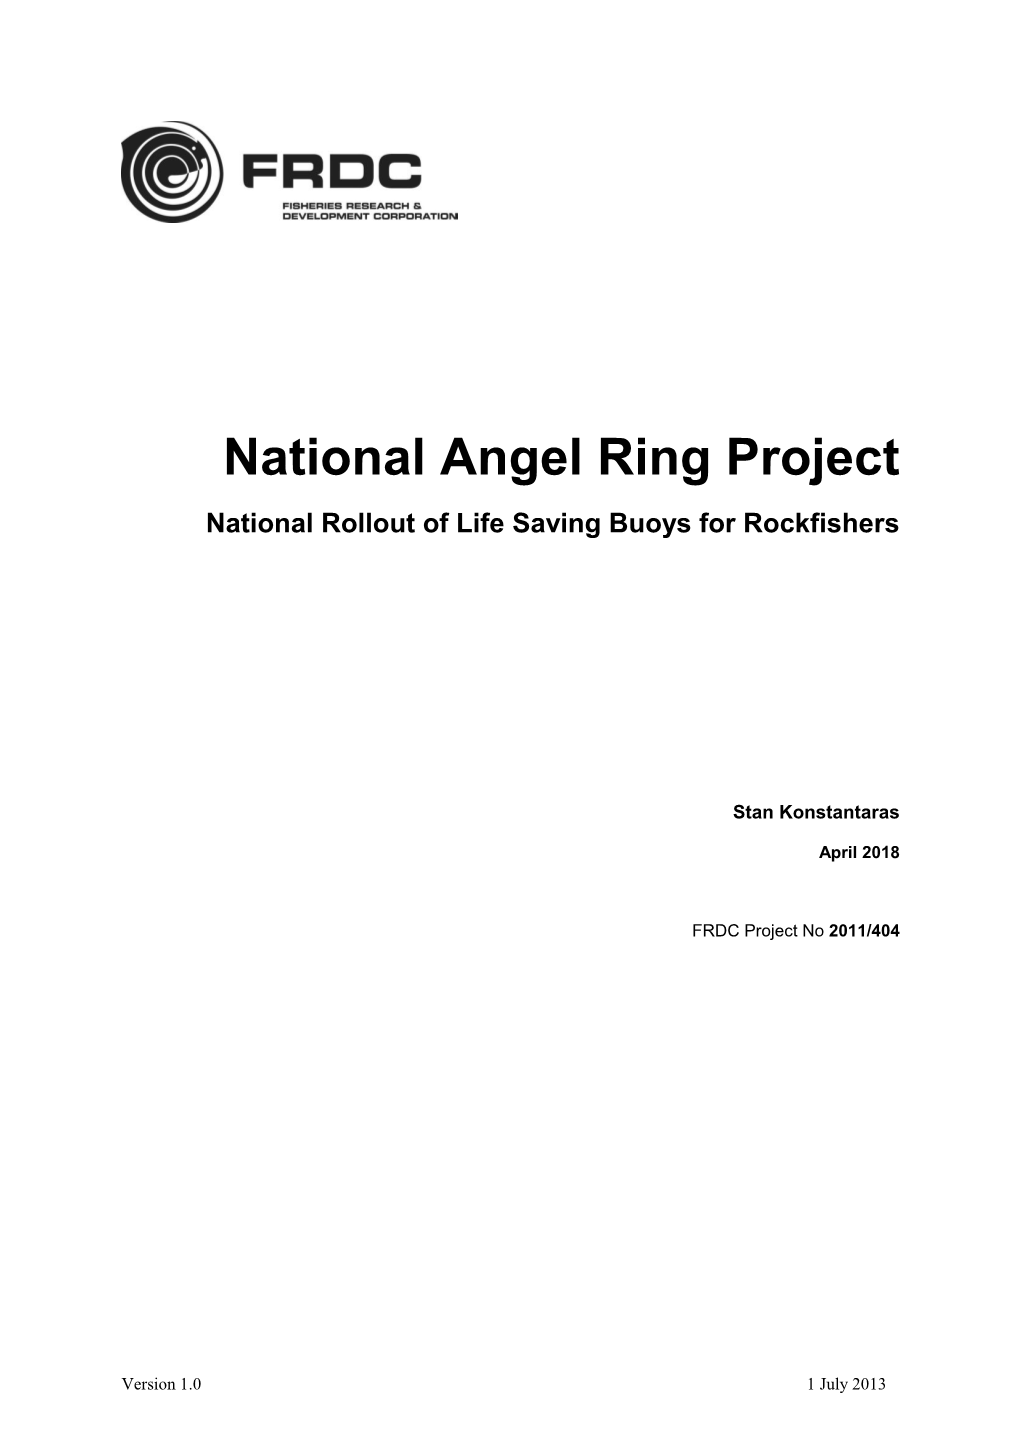 National Angel Ring Project National Rollout of Life Saving Buoys for Rockfishers